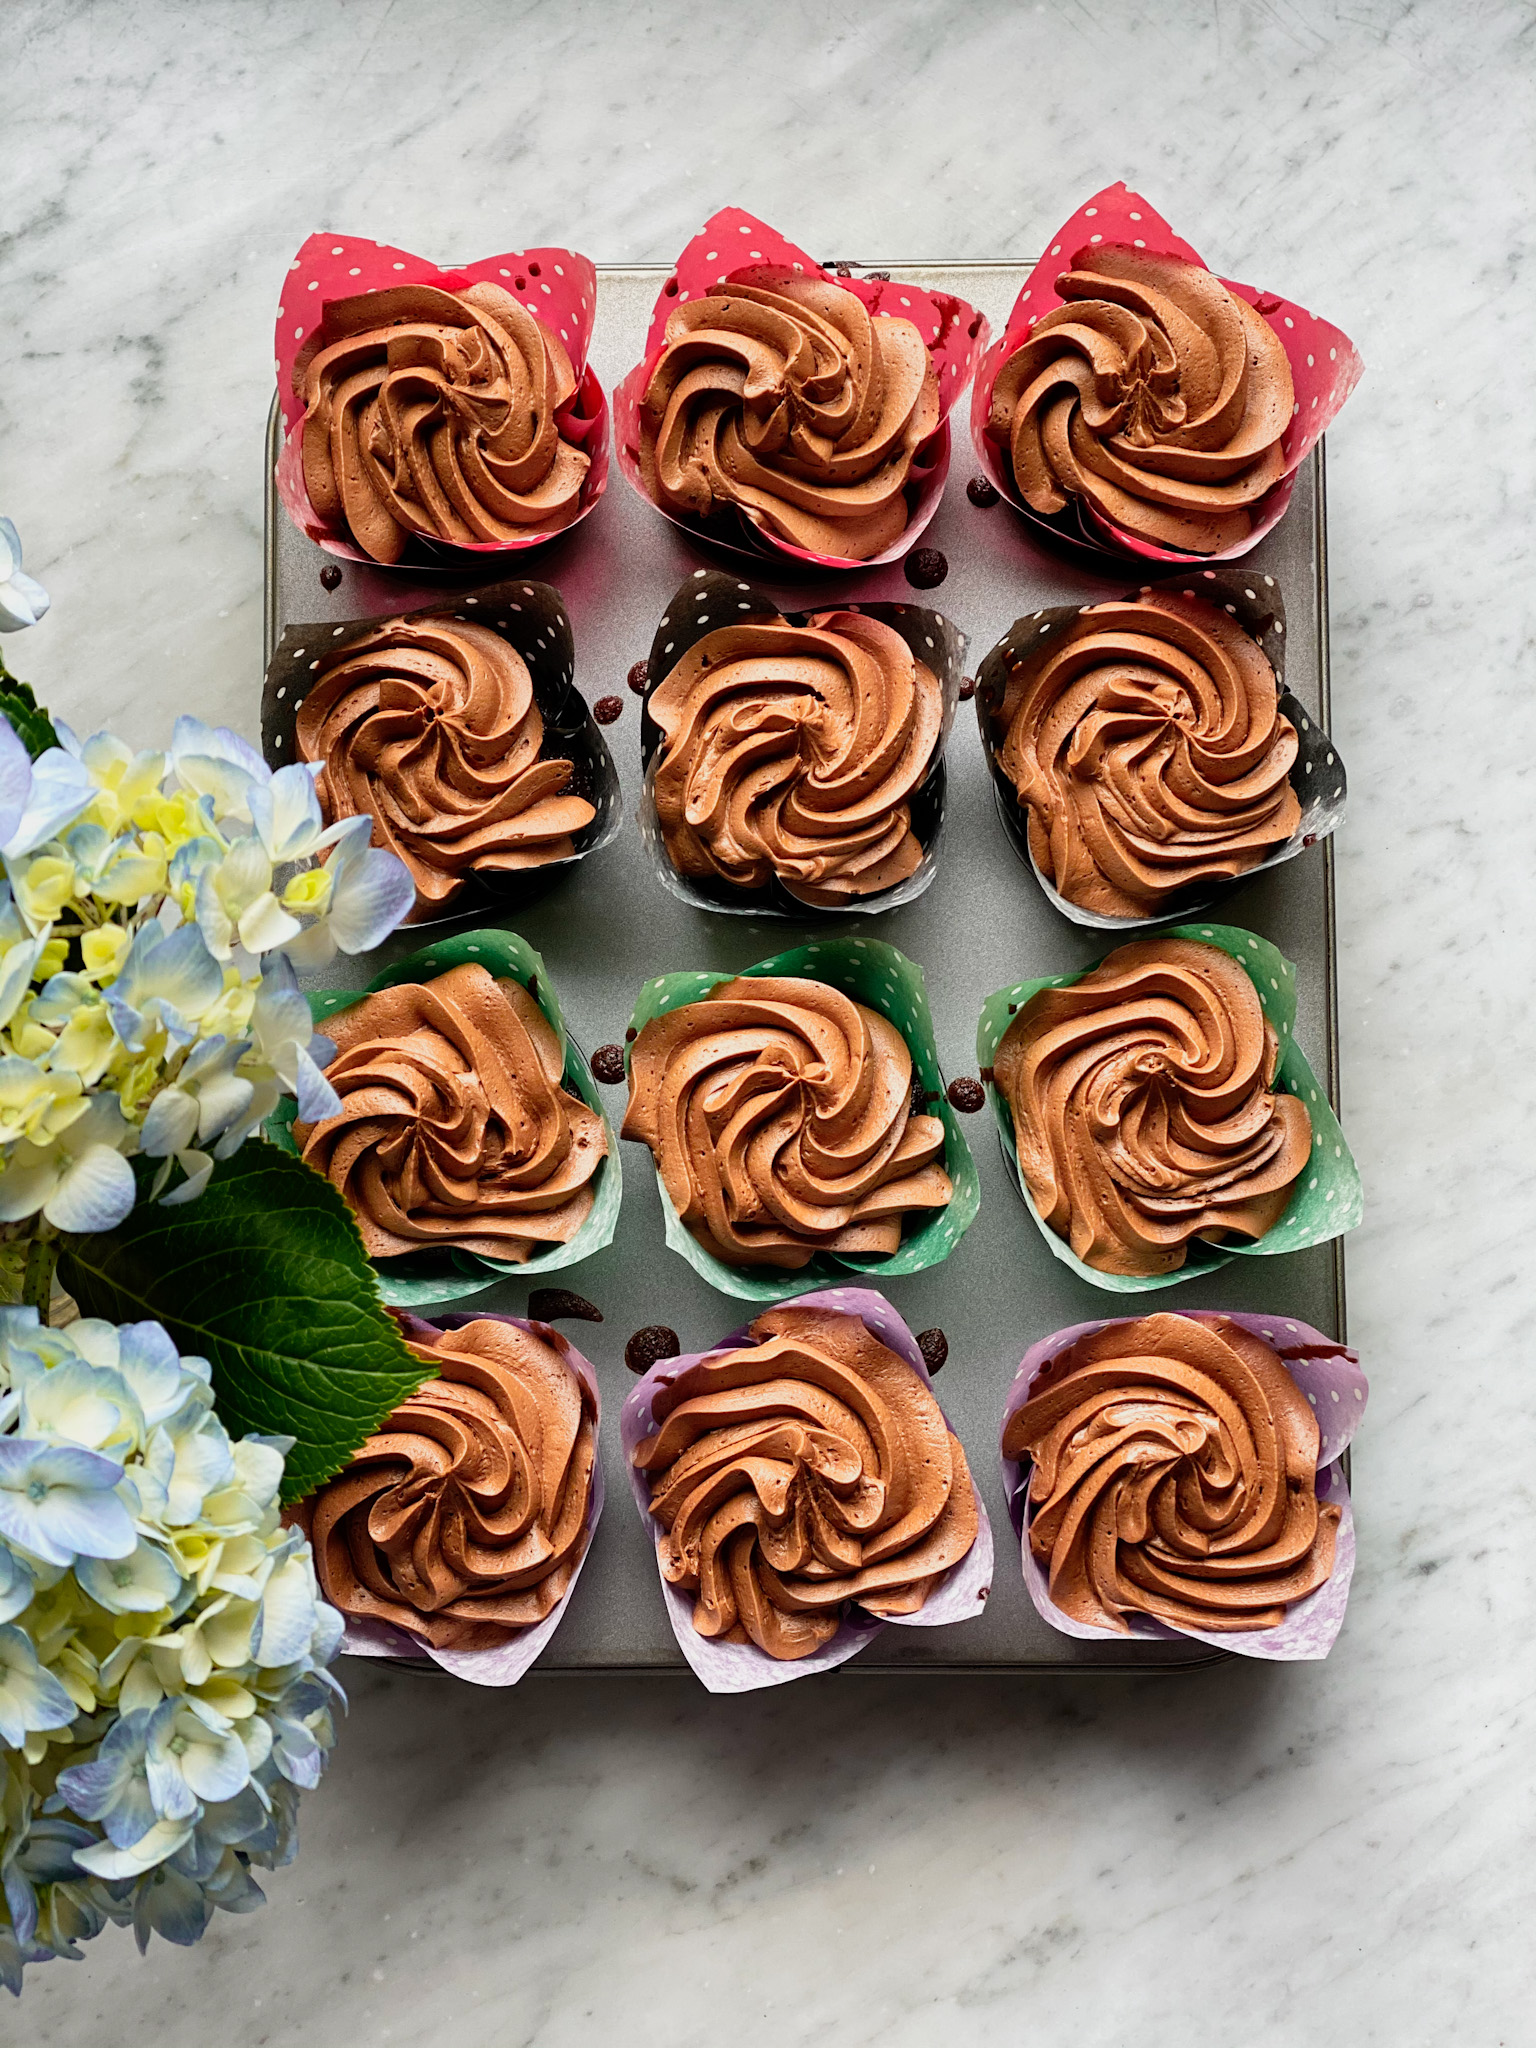 a dozen chocolate cupcakes and white flowers